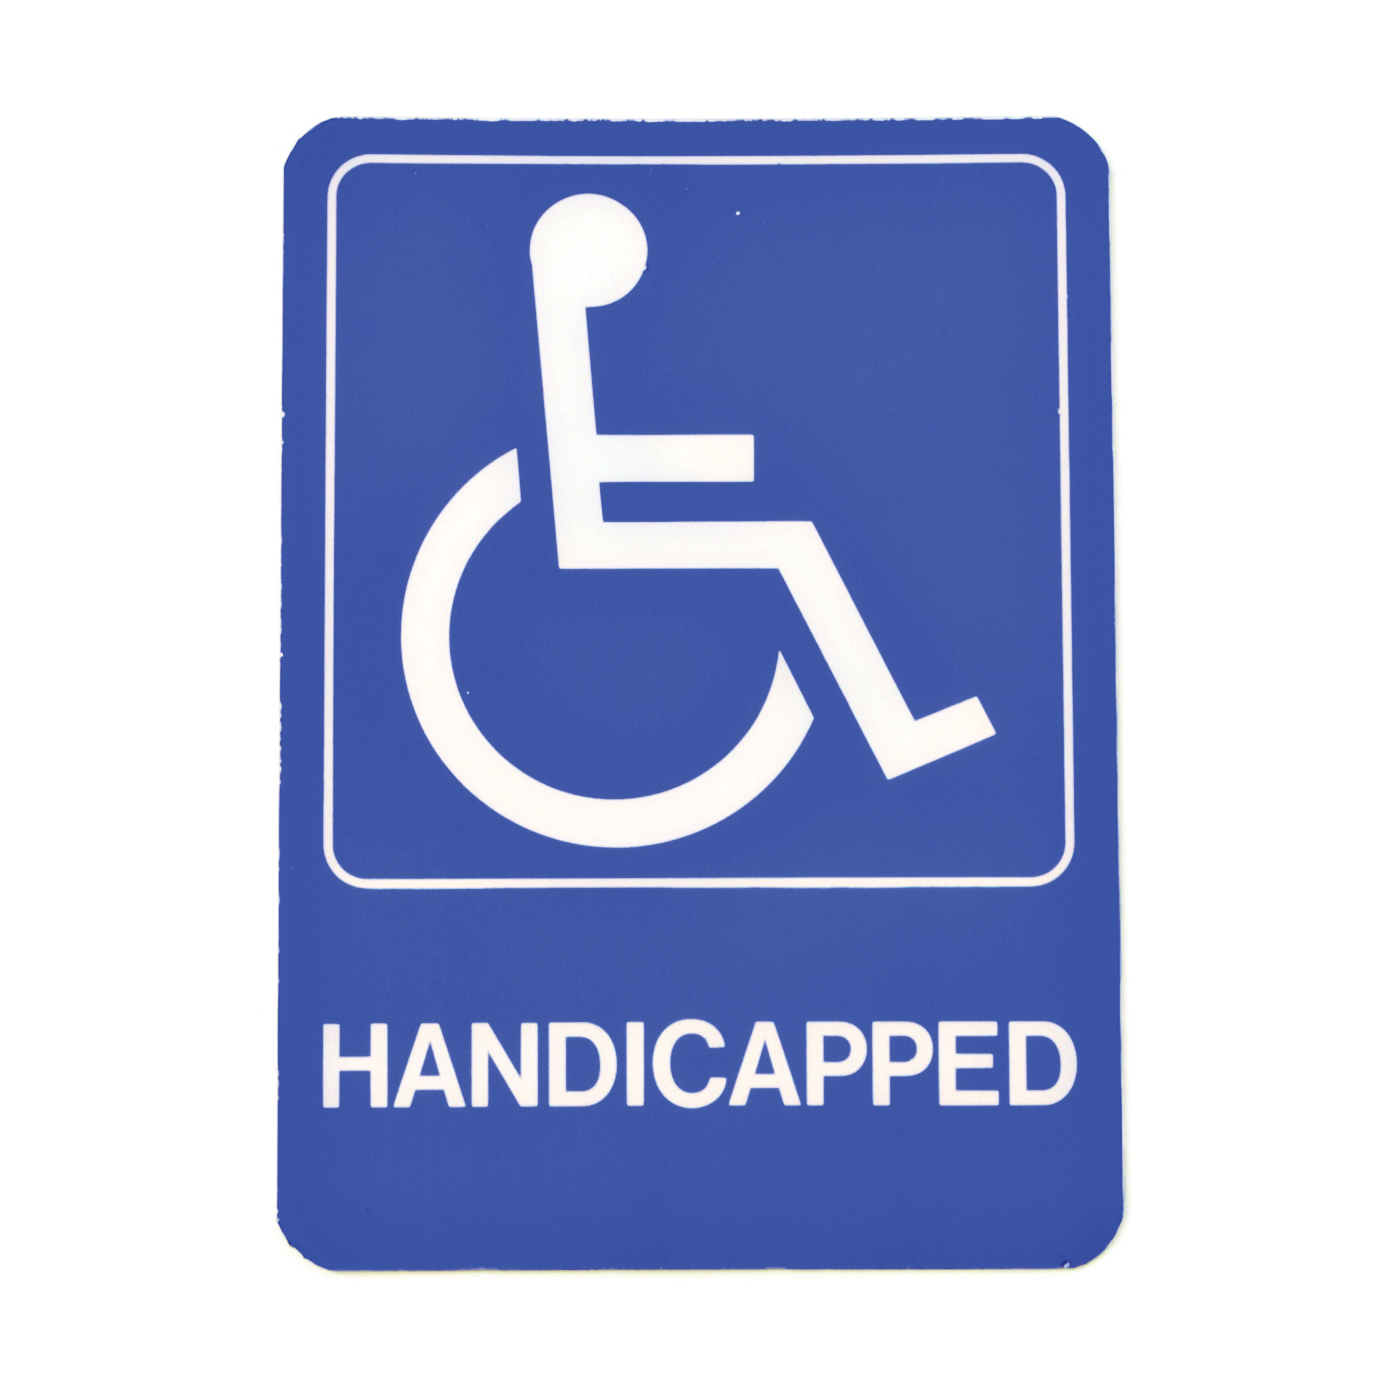 D-17 Graphic Sign, Rectangular, HANDICAPPED, White Legend, Blue Background, Plastic, 5 in W x 7 in H Dimensions